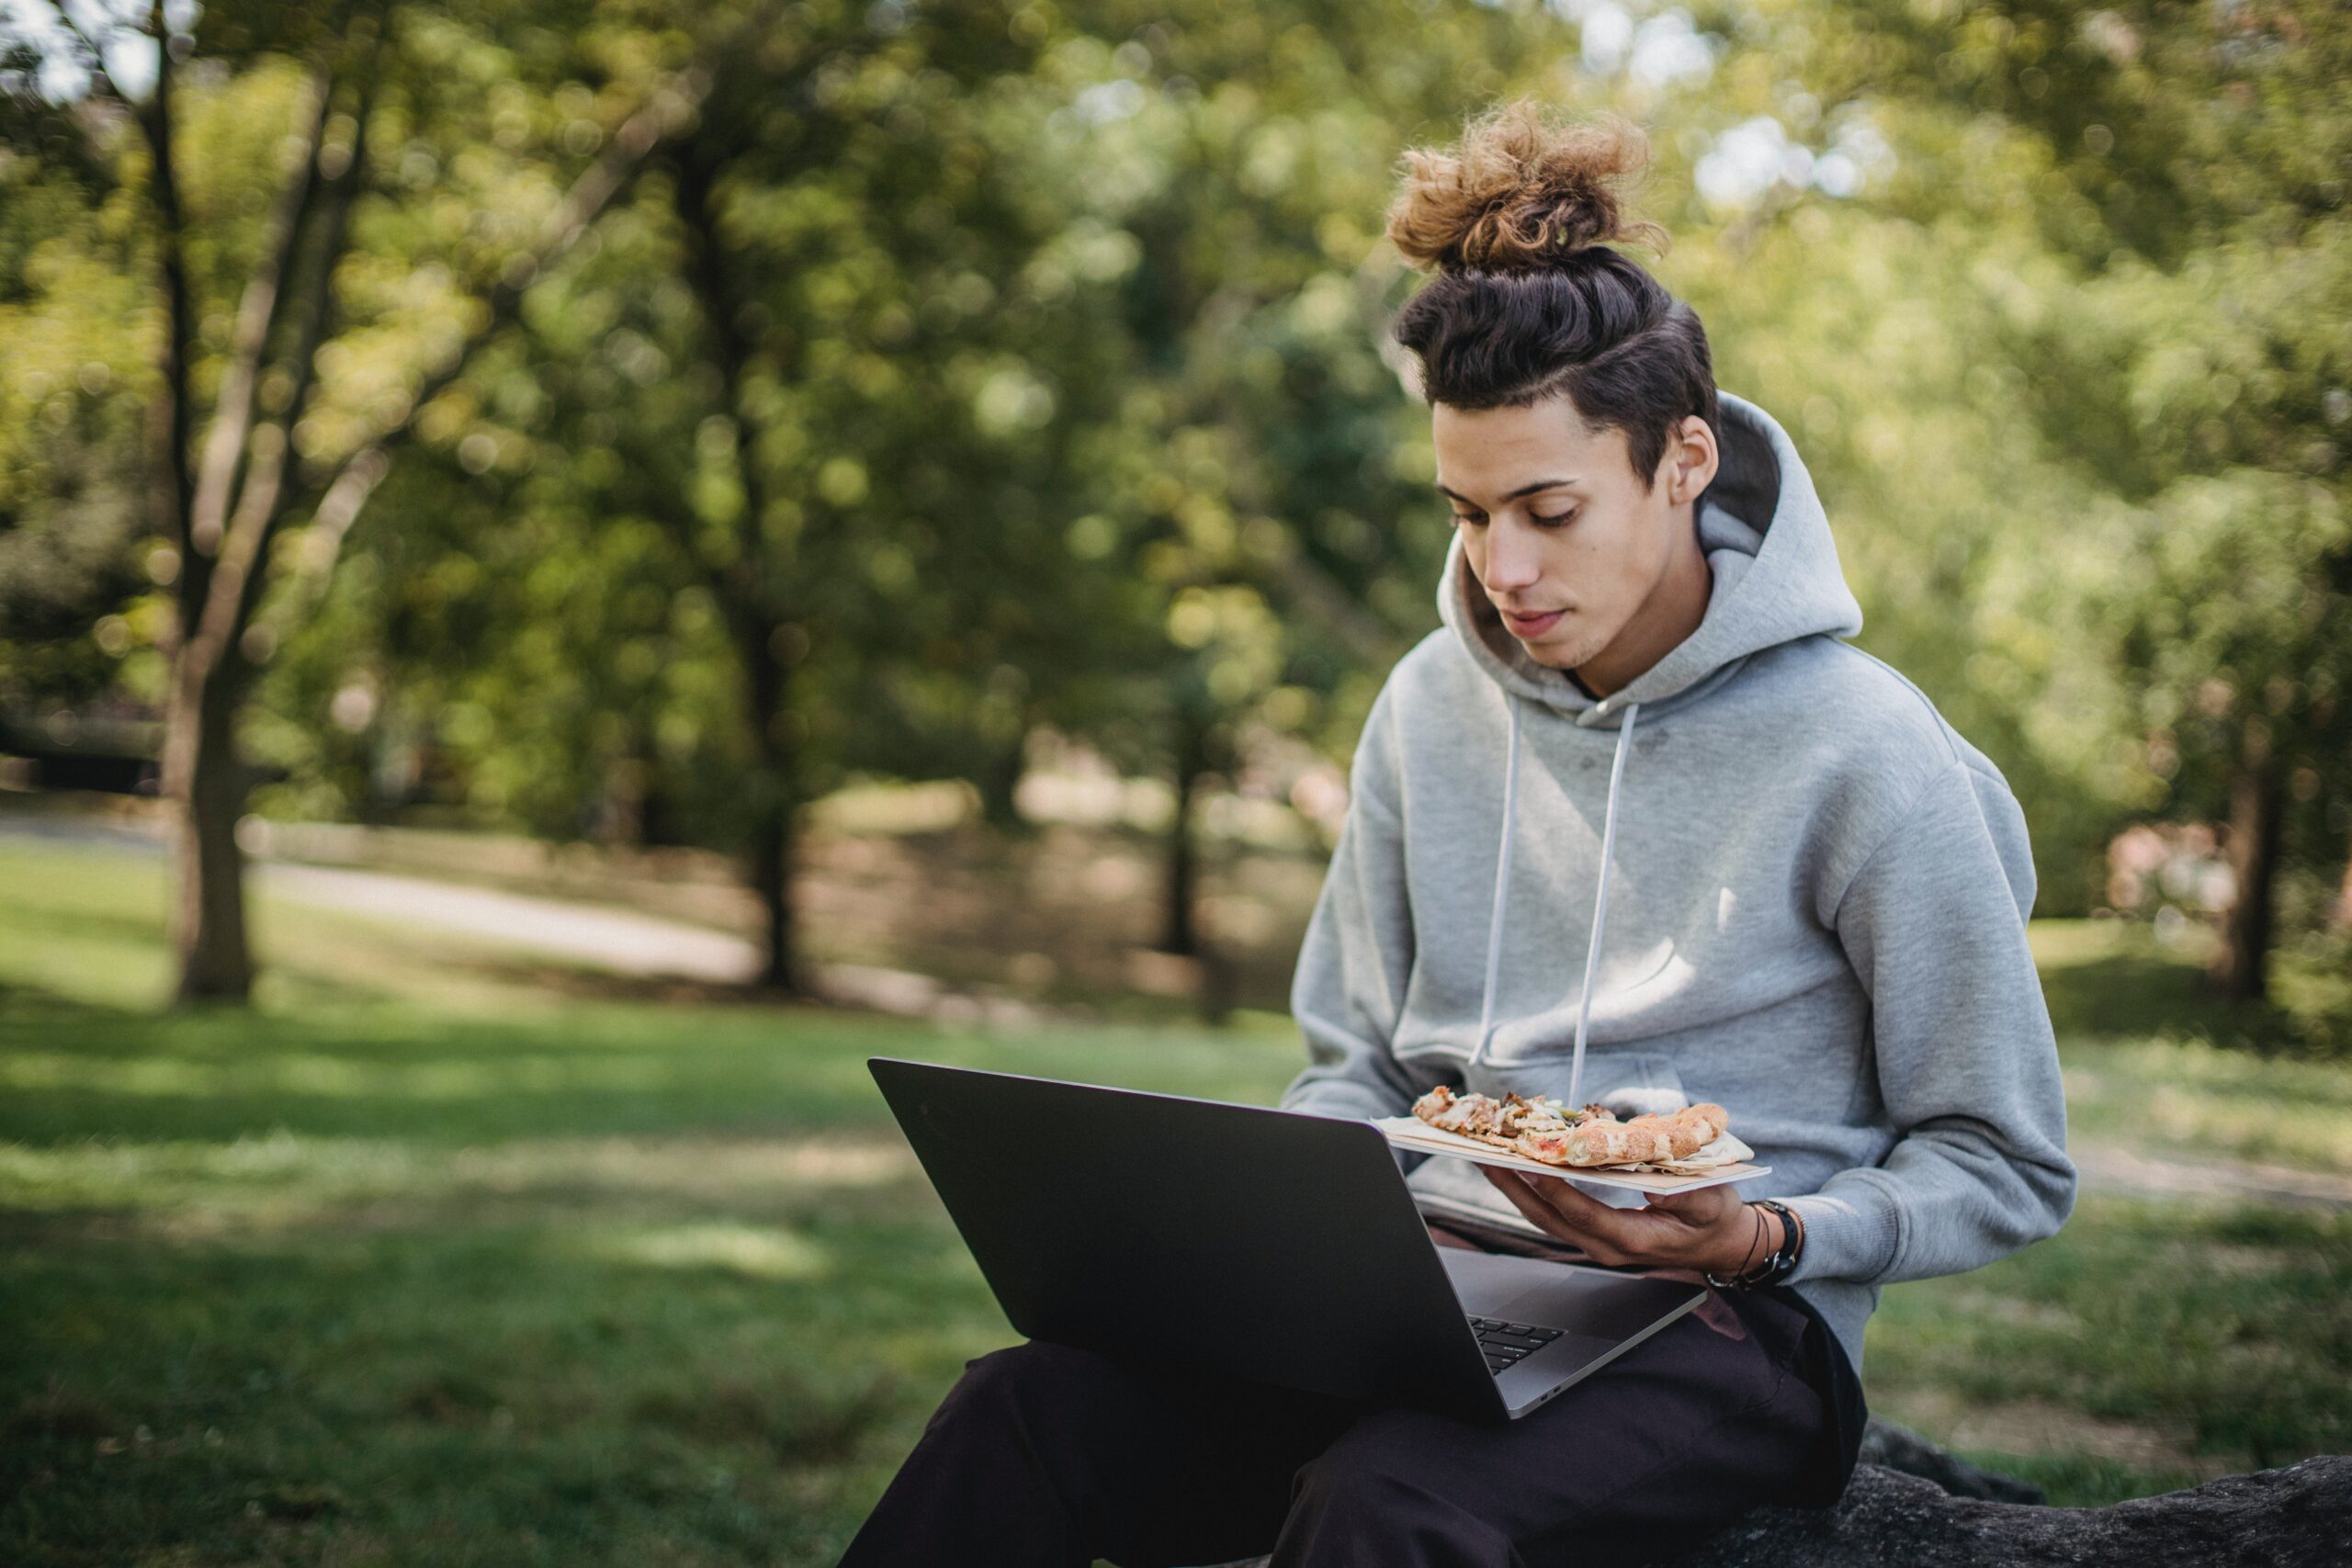 Male college student sitting on the campus lawn on his laptop holding a slice of pizza wearing a hoodie with a man bun